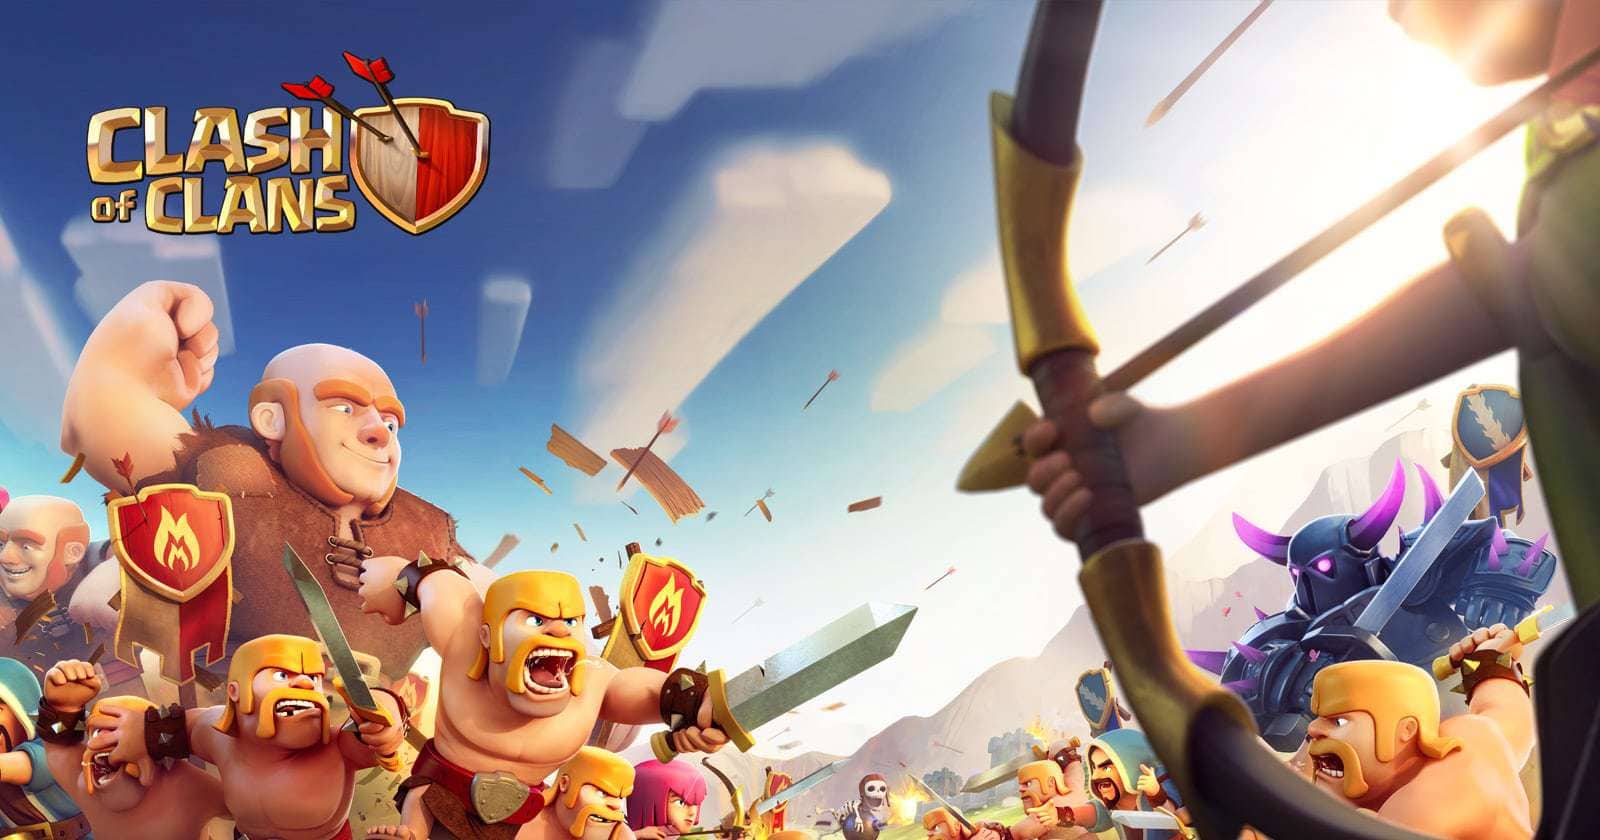 Supercell games